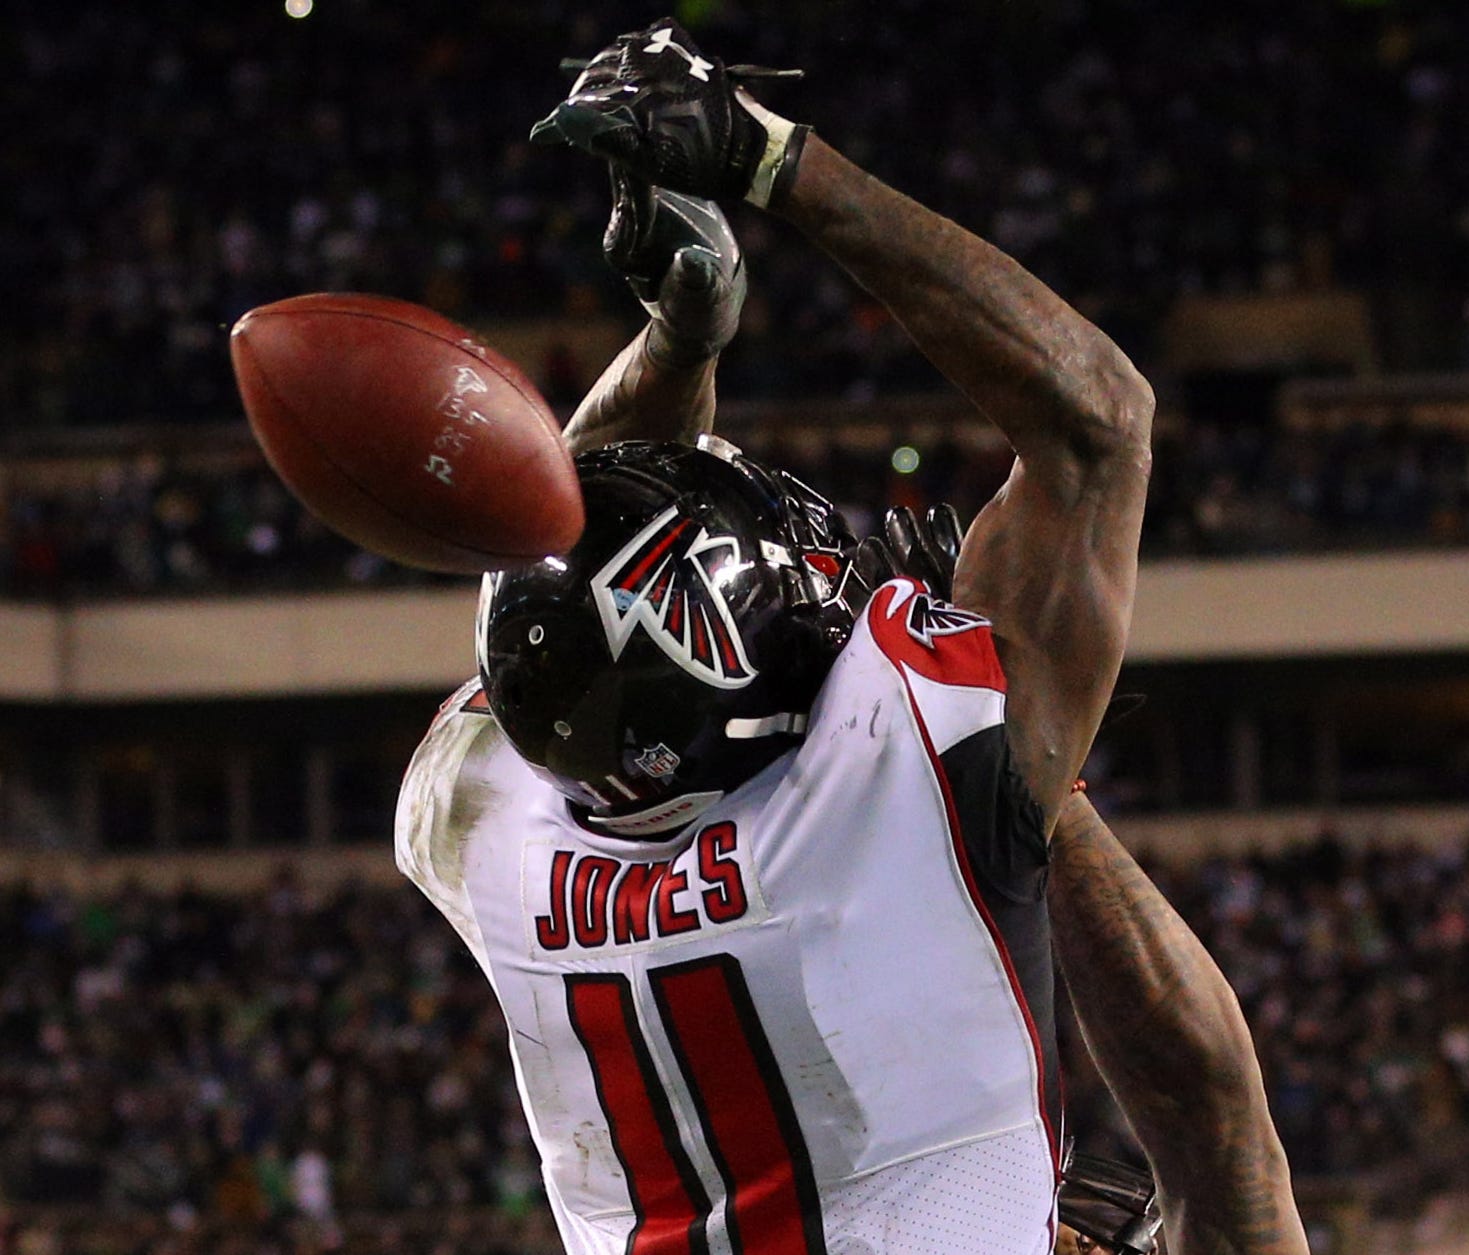 Falcons WR Julio Jones (11) misses a pass in the end zone on Atlanta's final offensive play in Saturday's loss.